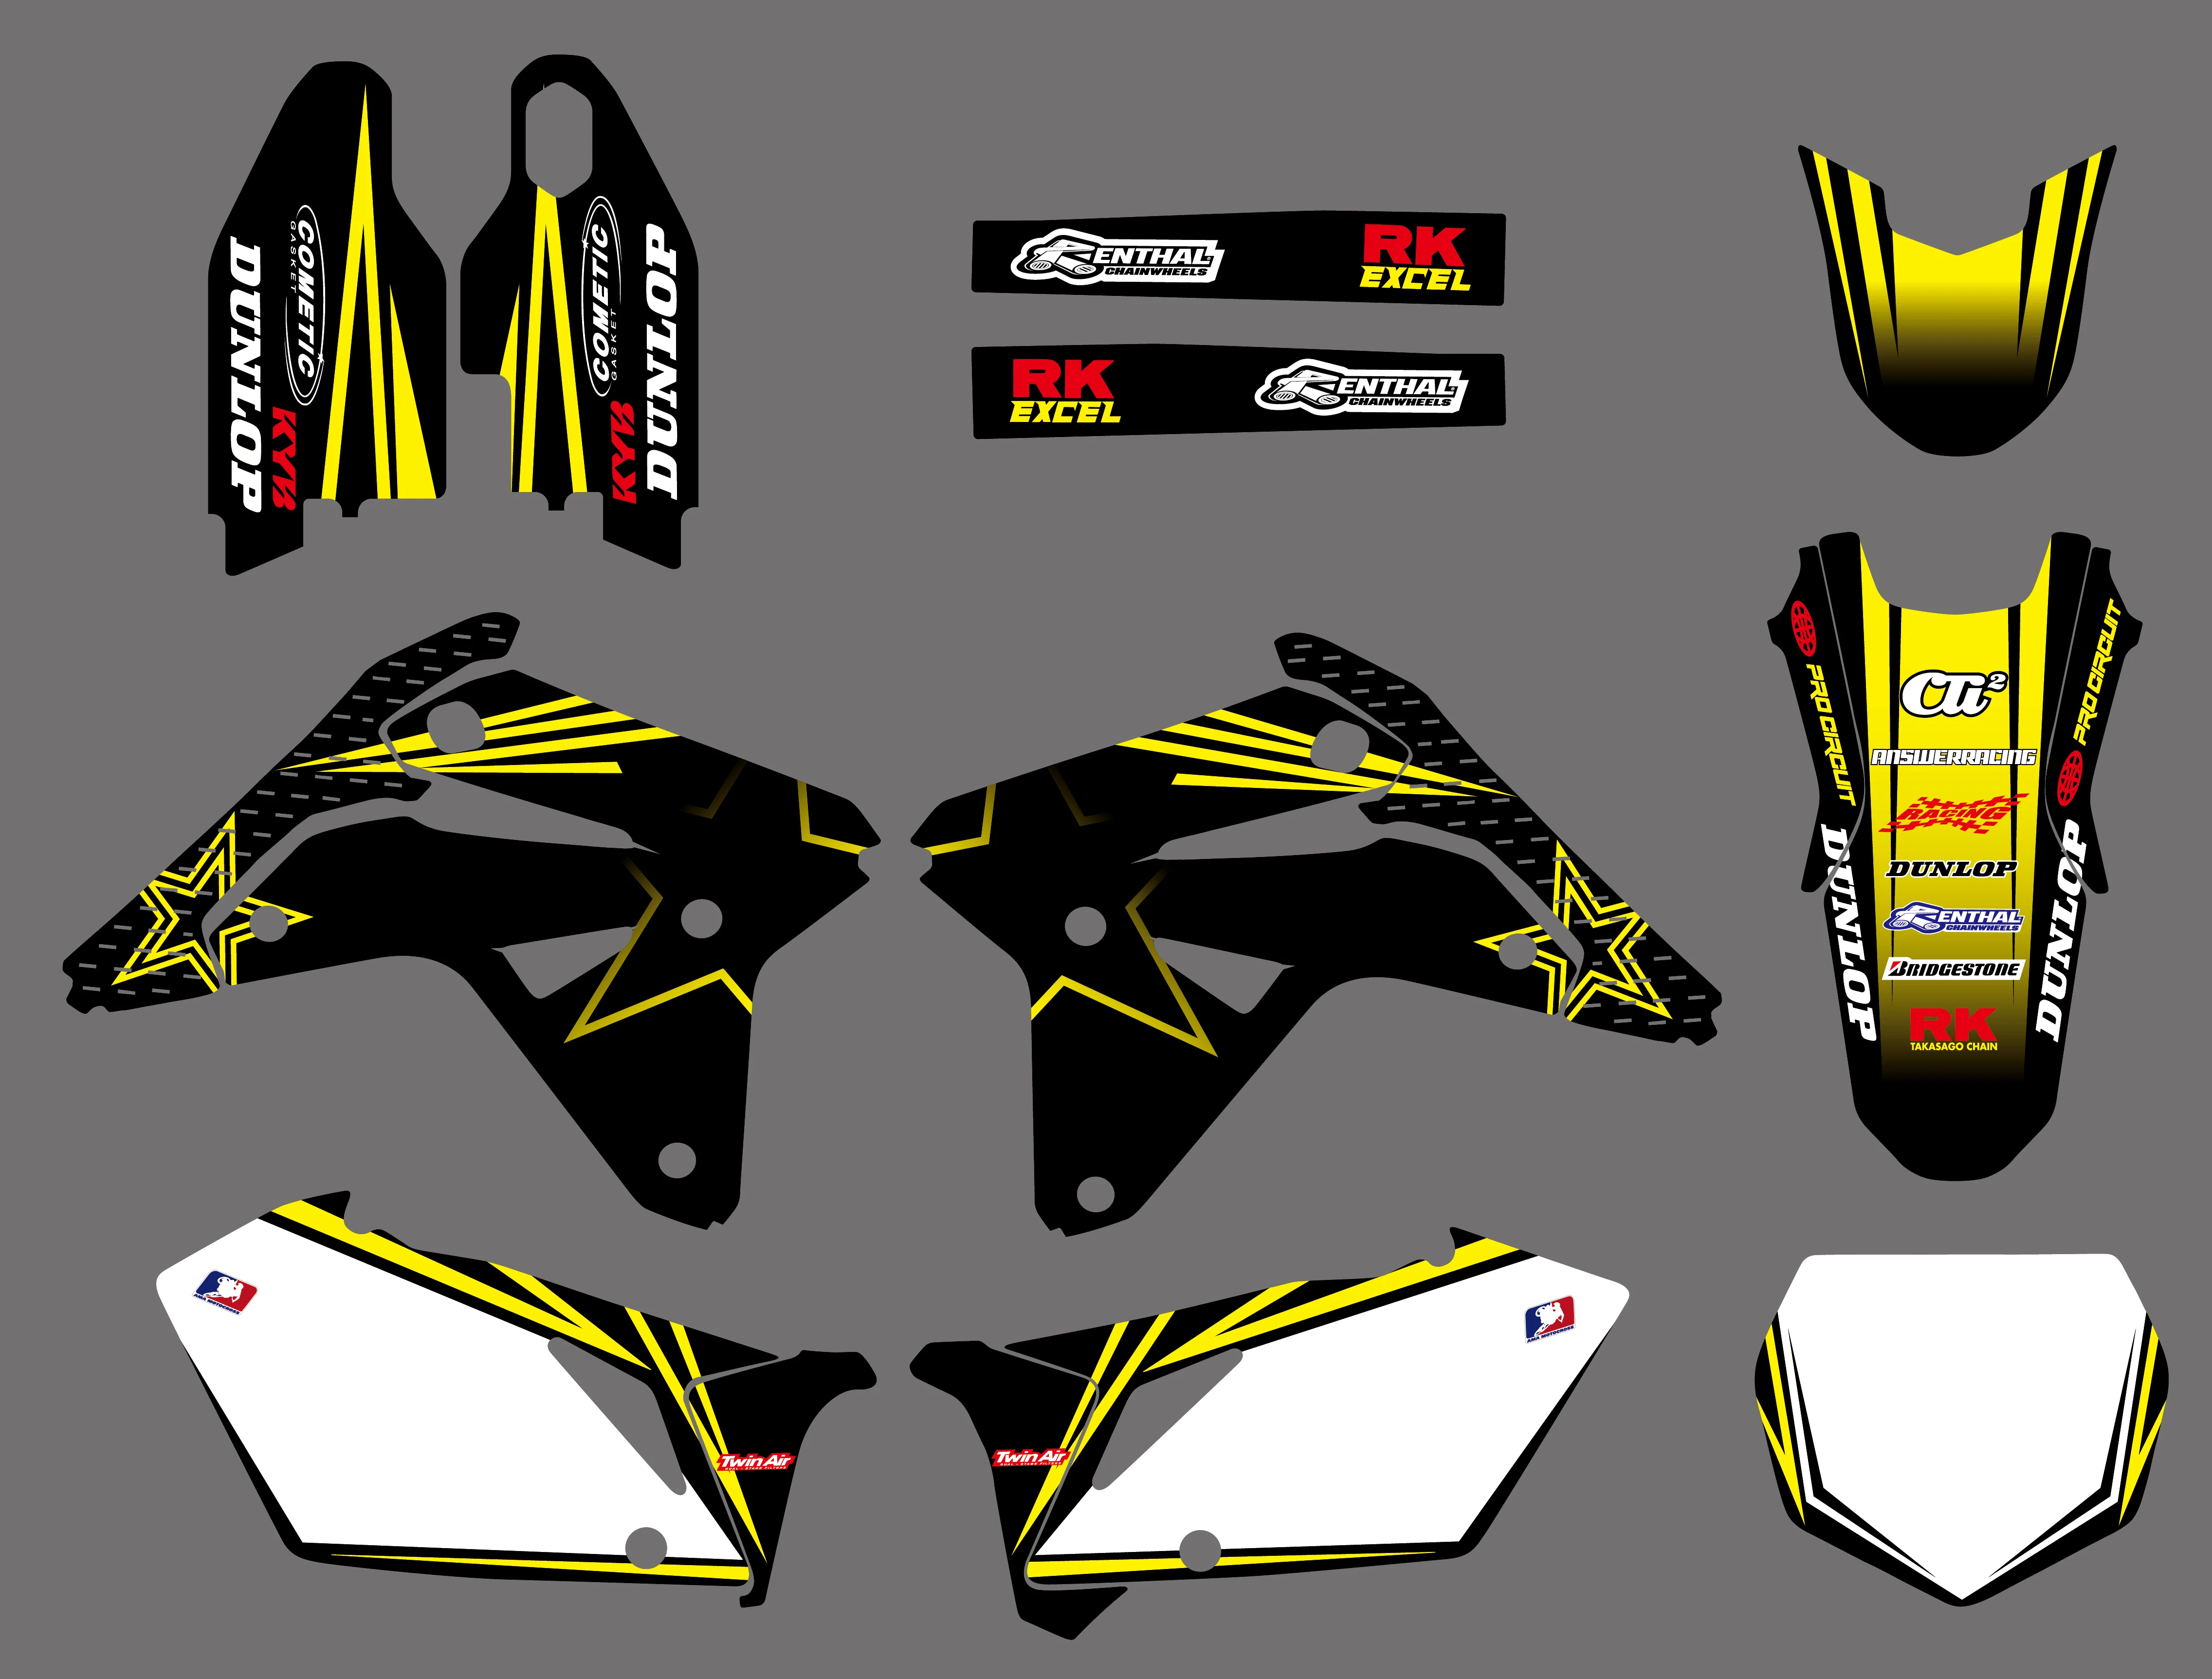 

NEW TEAM DECALS GRAPHICS BACKGROUNDS STICKERS FOR Suzuki RMZ450 RM-Z 450 RMZ 2007 Motorcycle Graphic Decal Sticker